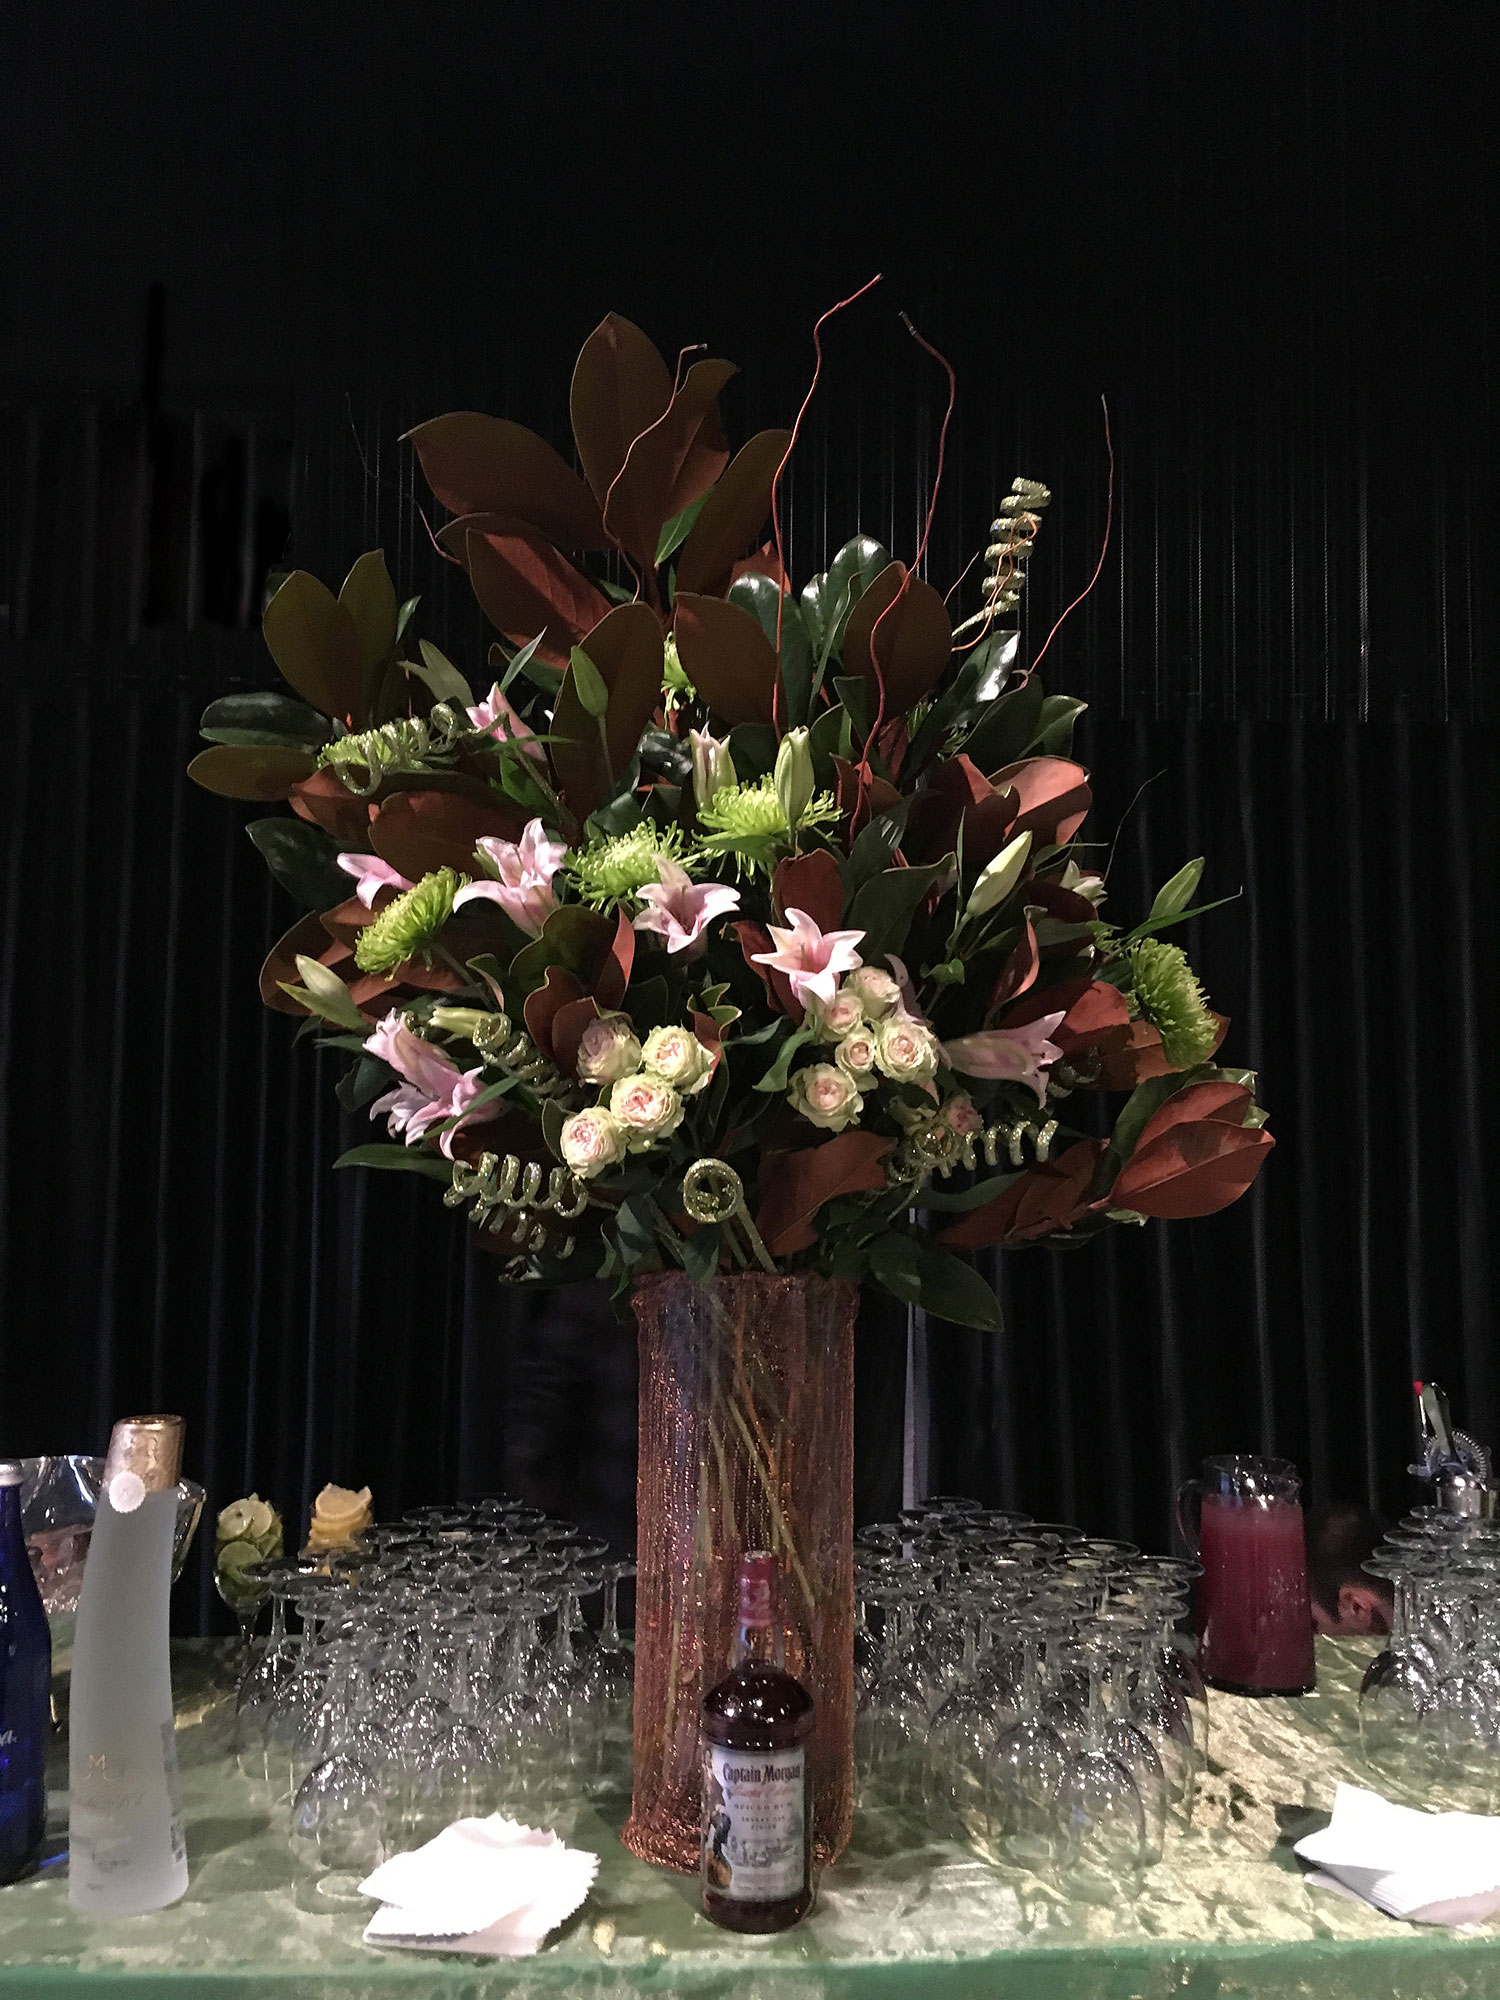  parrish art museum, water mill, ny, floral designer, florist, flower arrangement, lilies, dinner party, home delivery, by appointment, charity event, hamptons, new york city, manhattan 